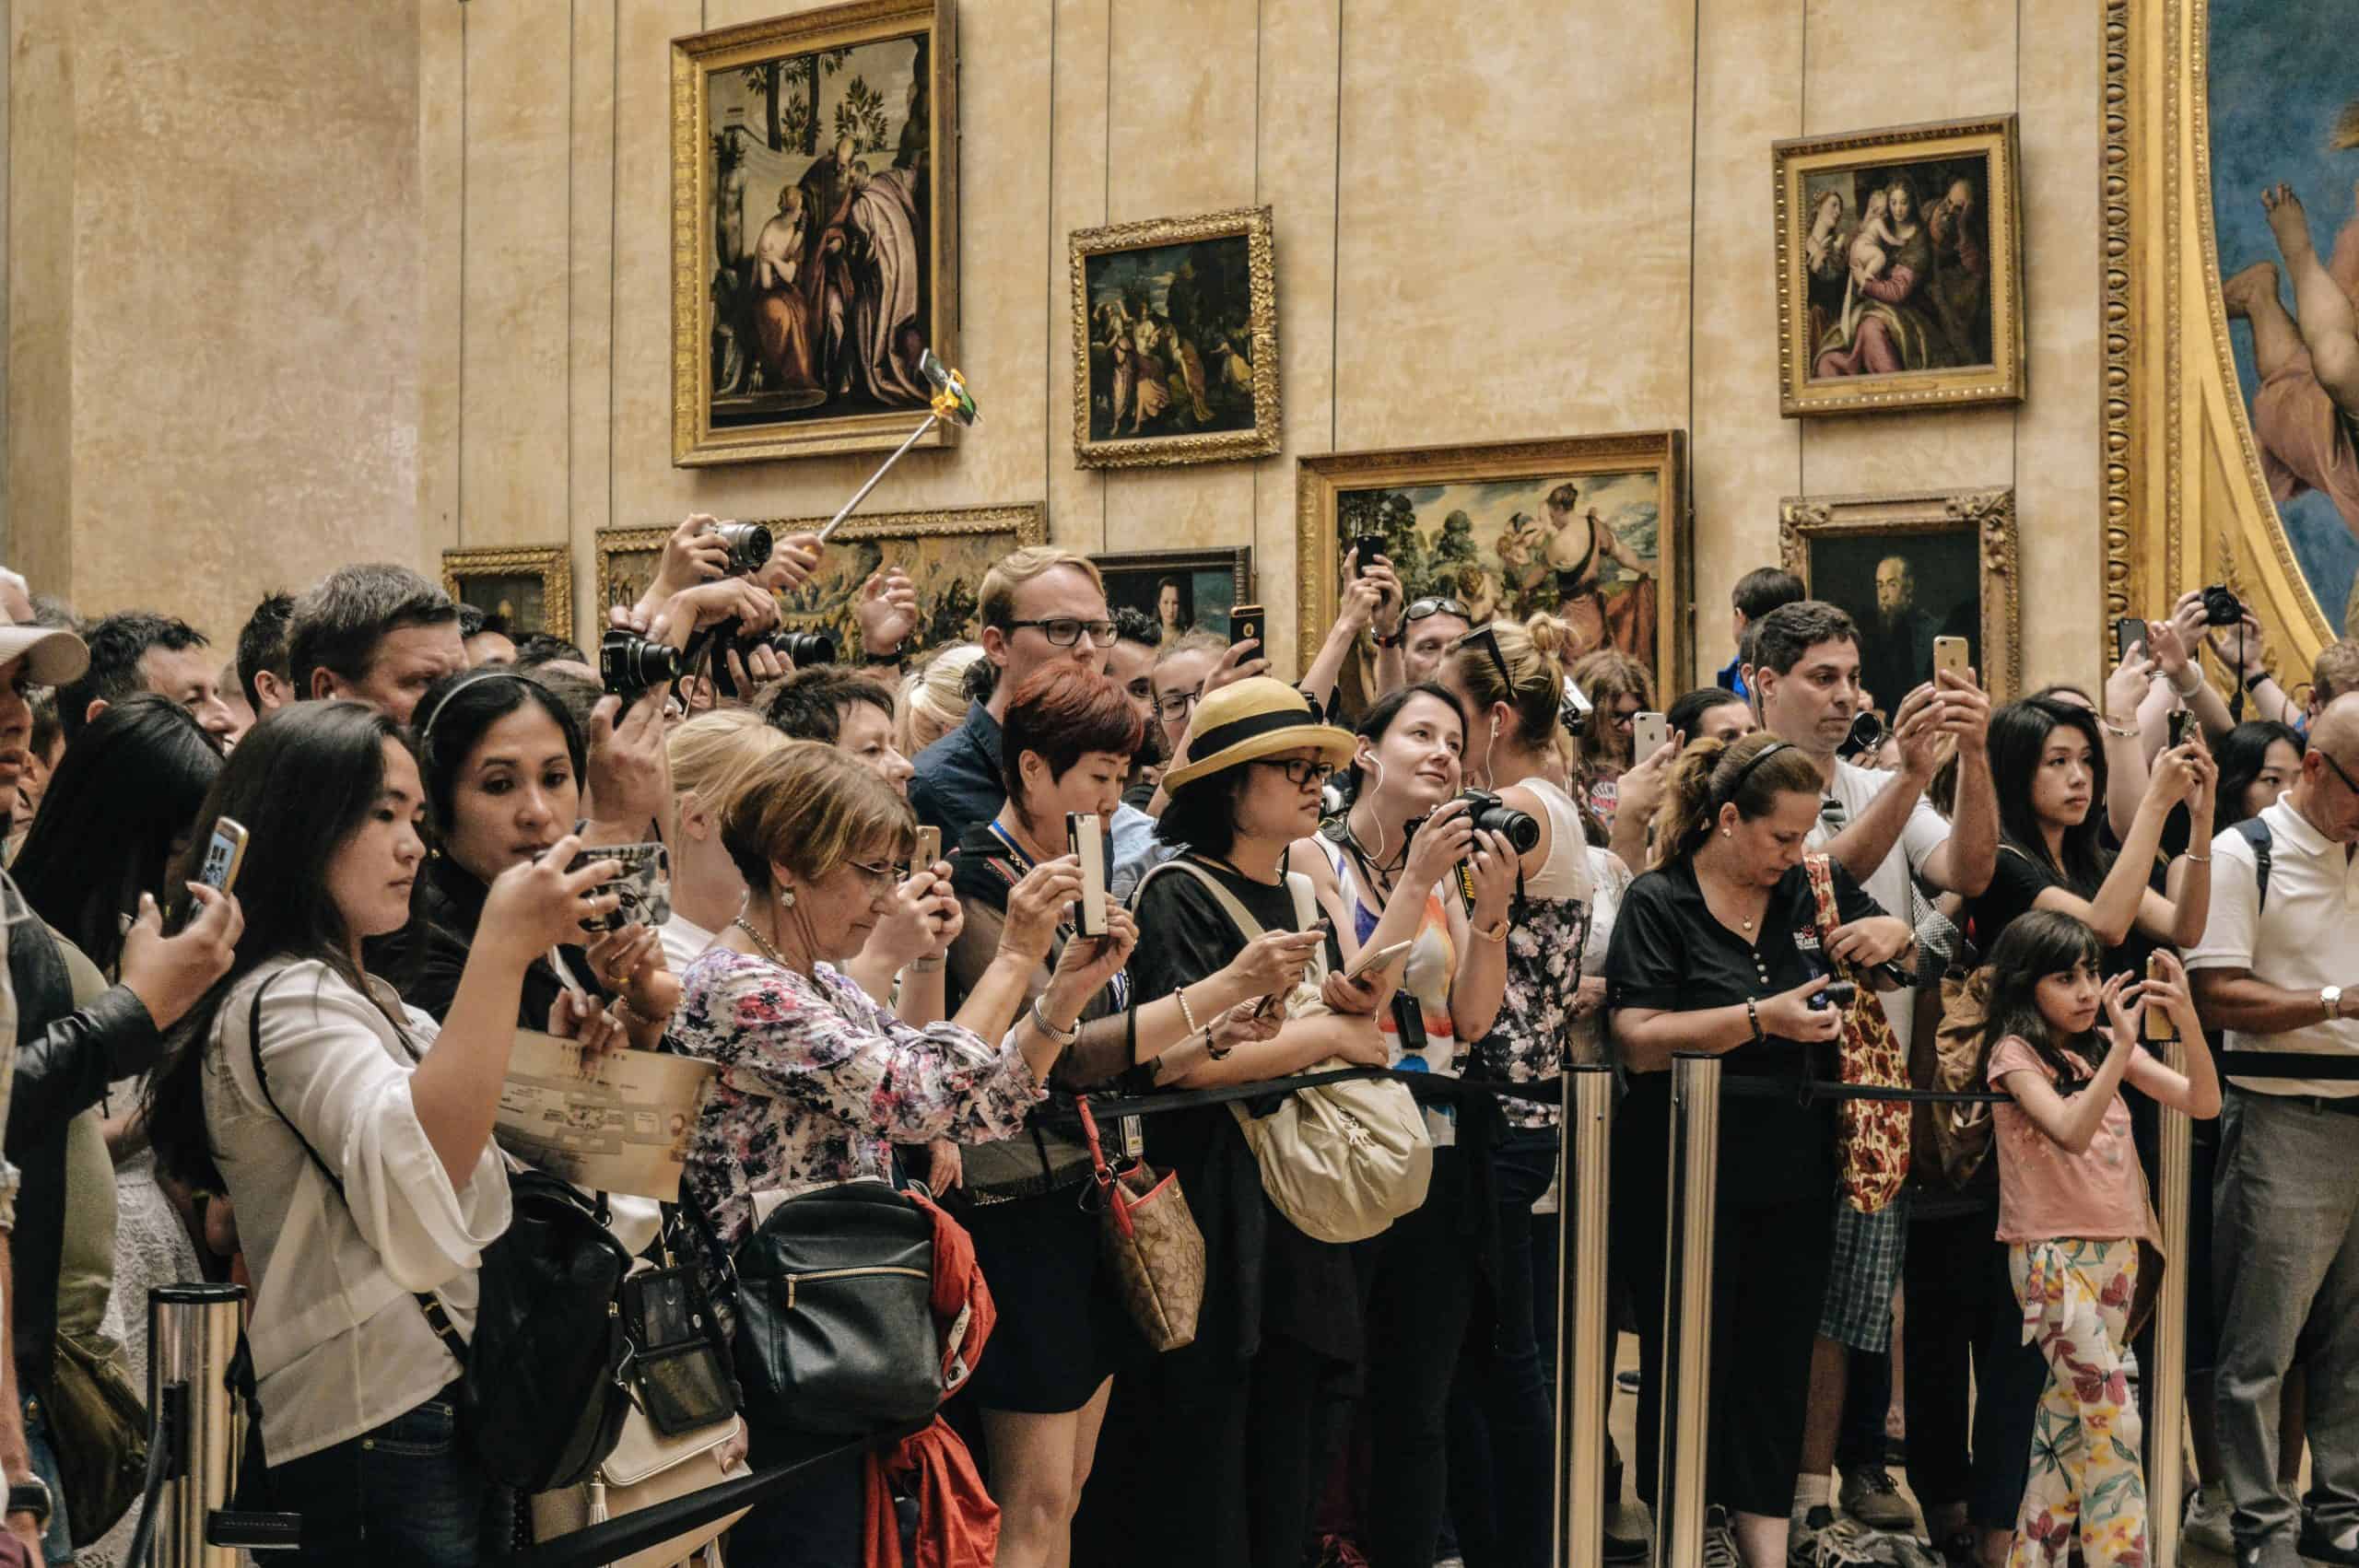 Crowd of people clustered together in a museum taking photographs